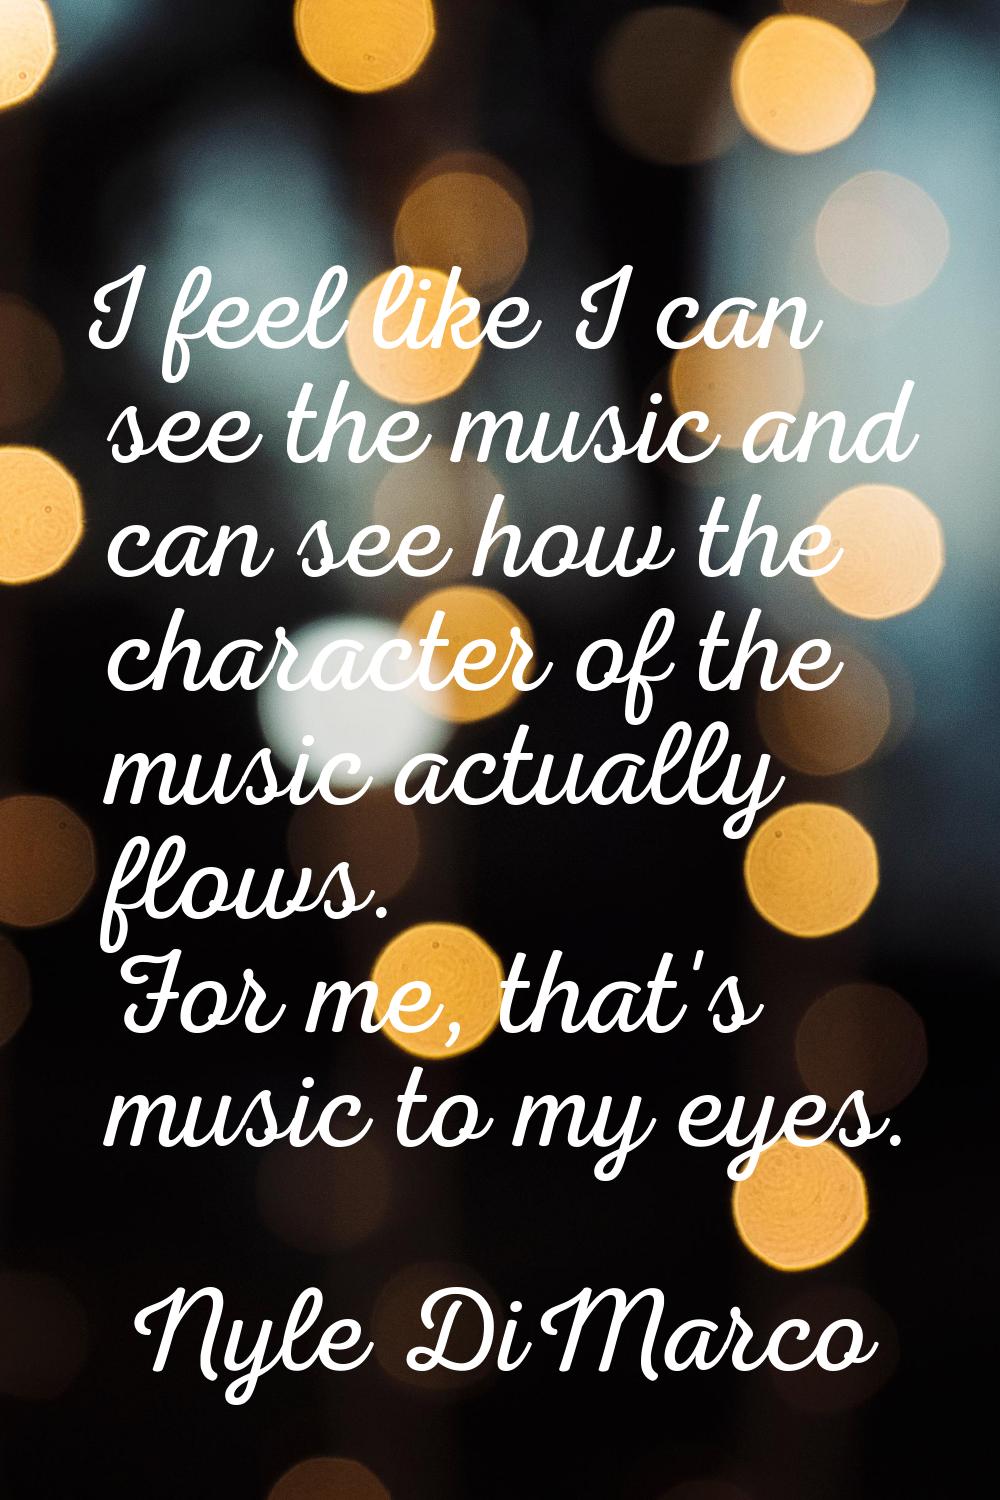 I feel like I can see the music and can see how the character of the music actually flows. For me, 